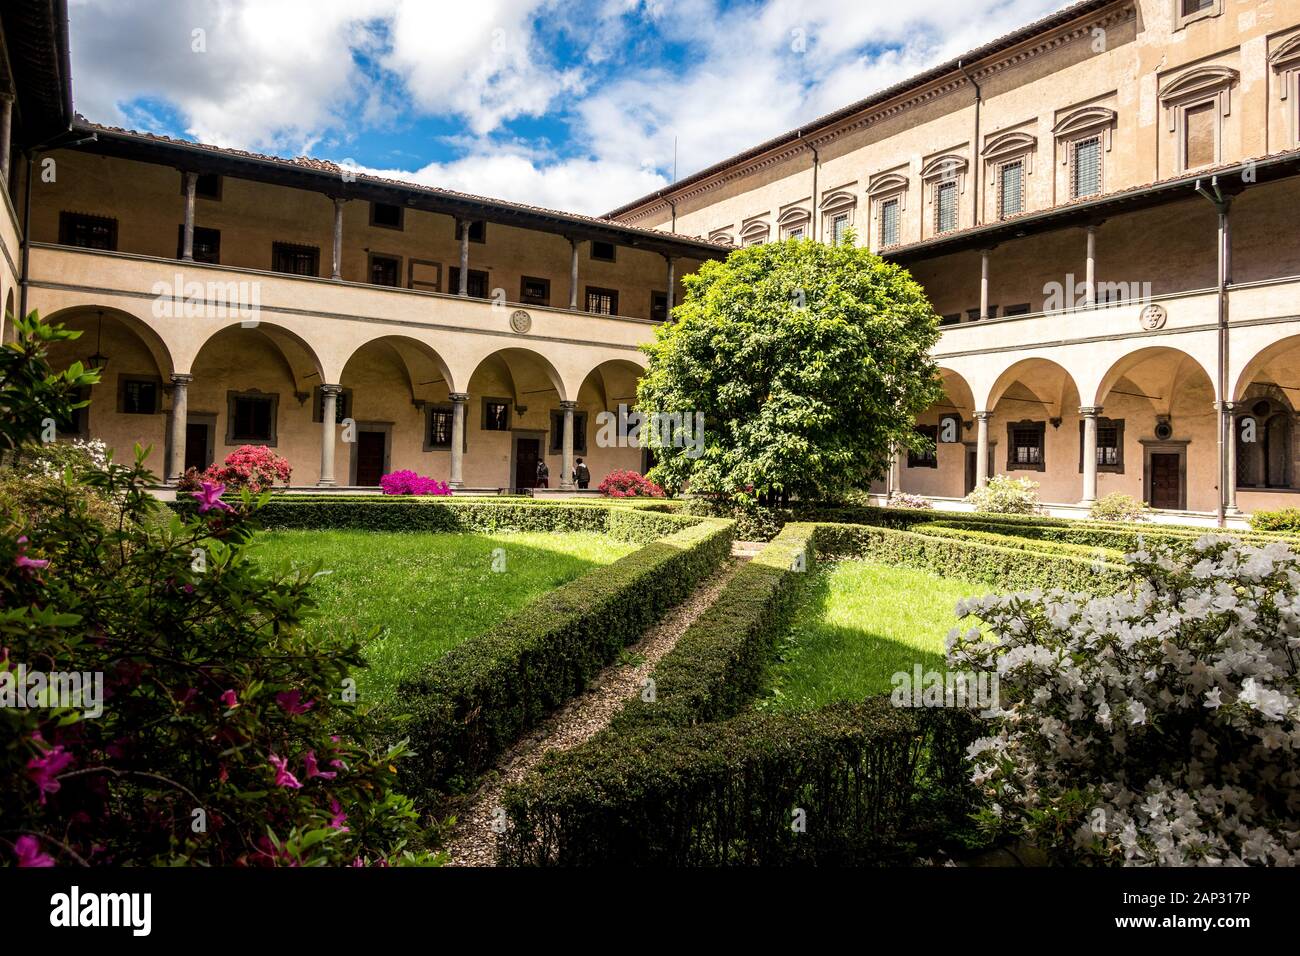 The Canon's Cloister area of Basilica of San Lorenzo in Florence Italy Stock Photo